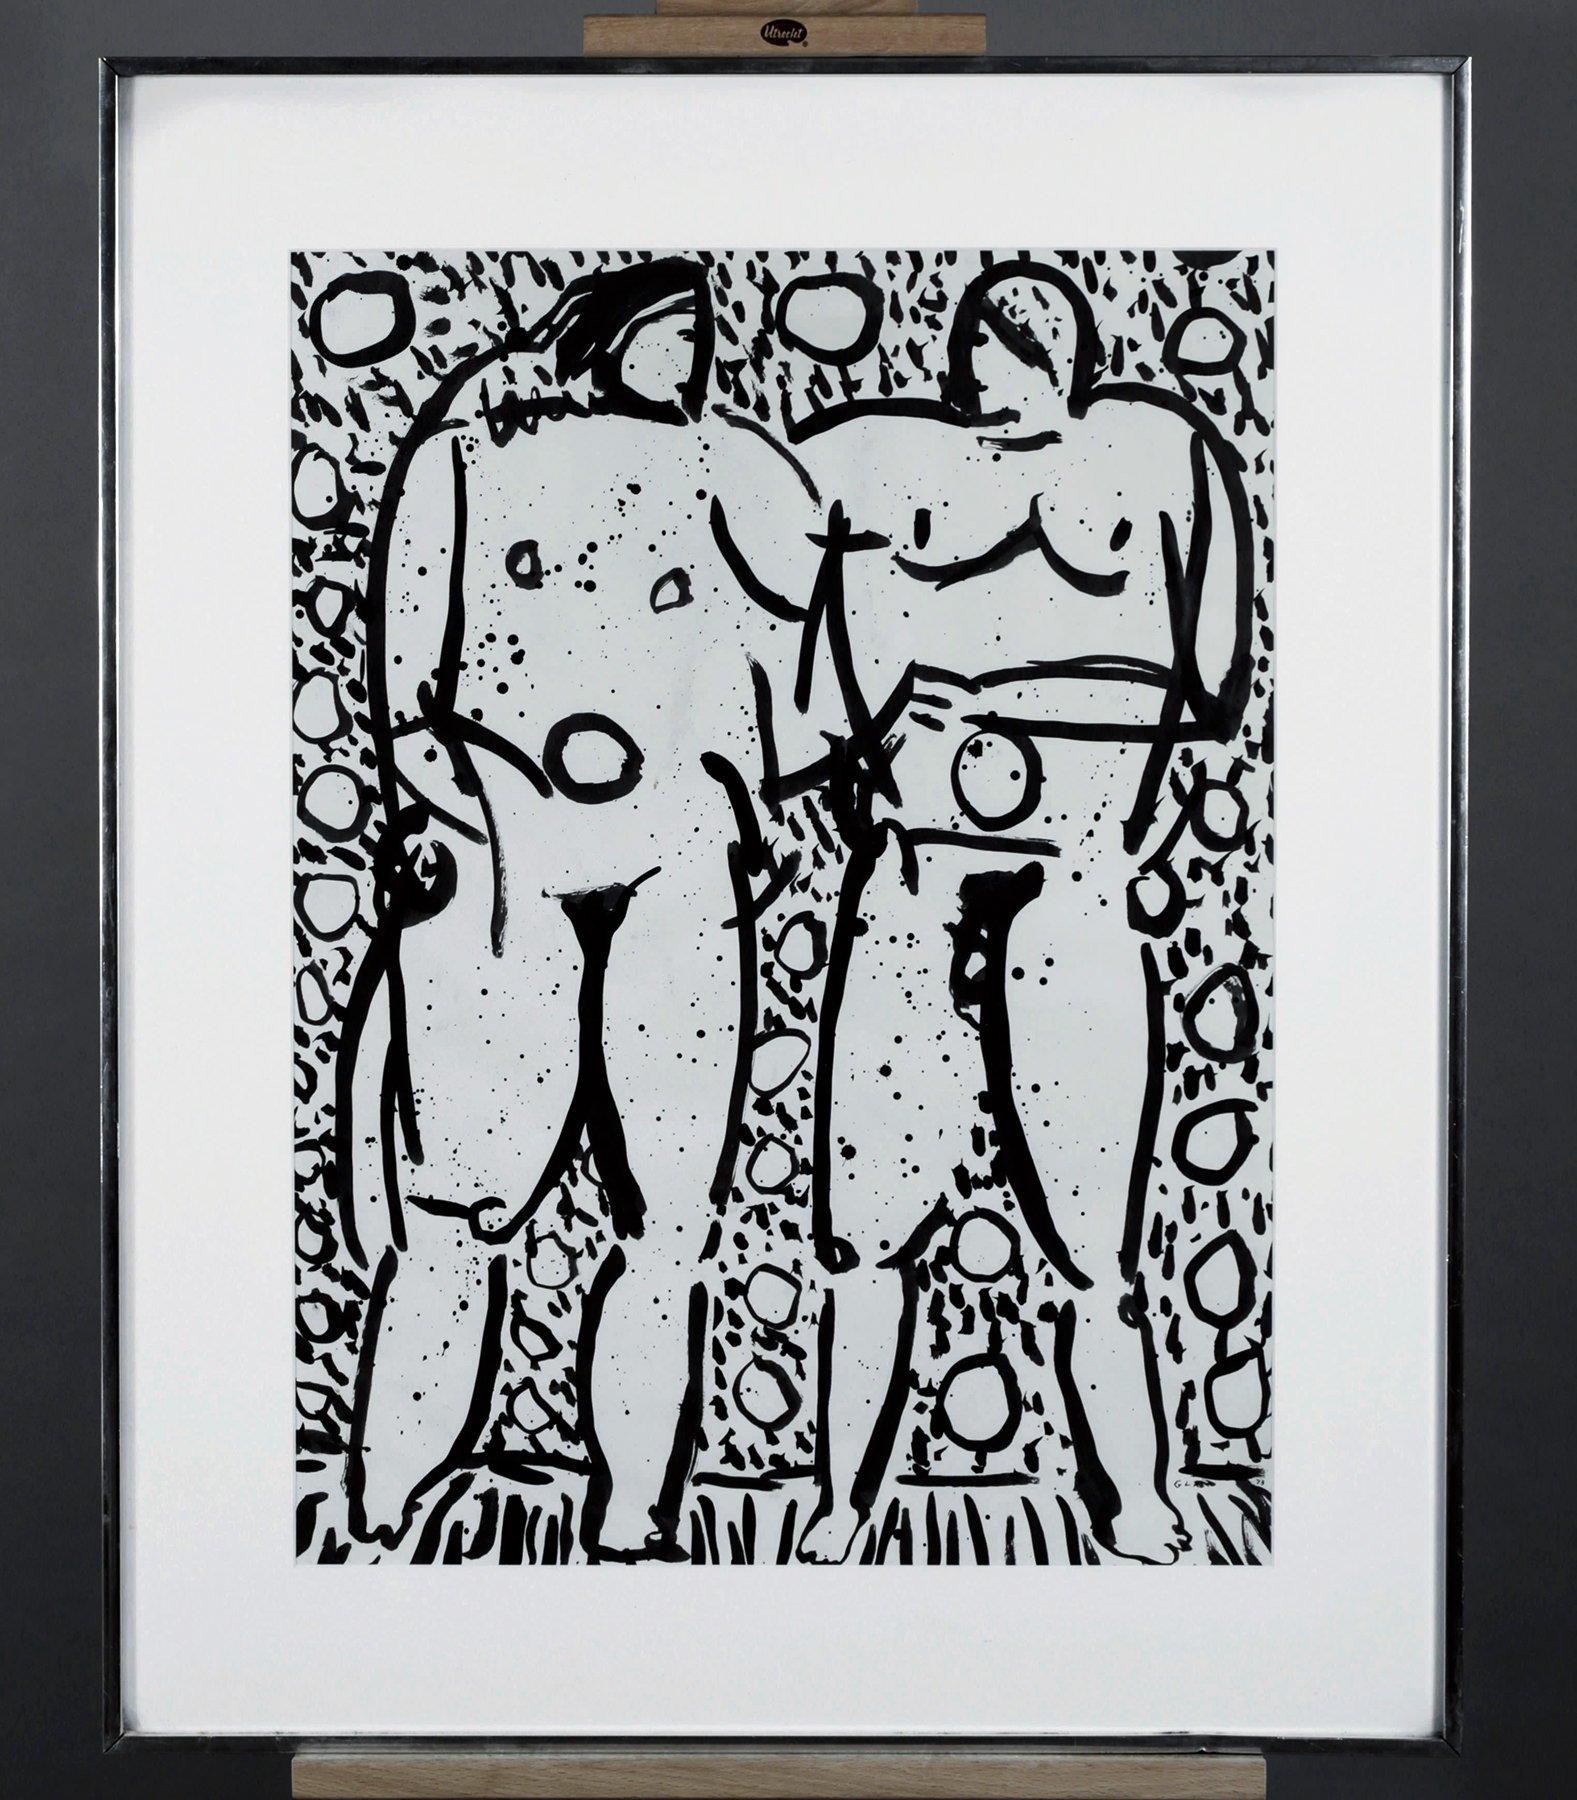 Adam and Eve, 20th century figural nude drawing, New York artist  - Abstract Expressionist Art by Joseph Glasco